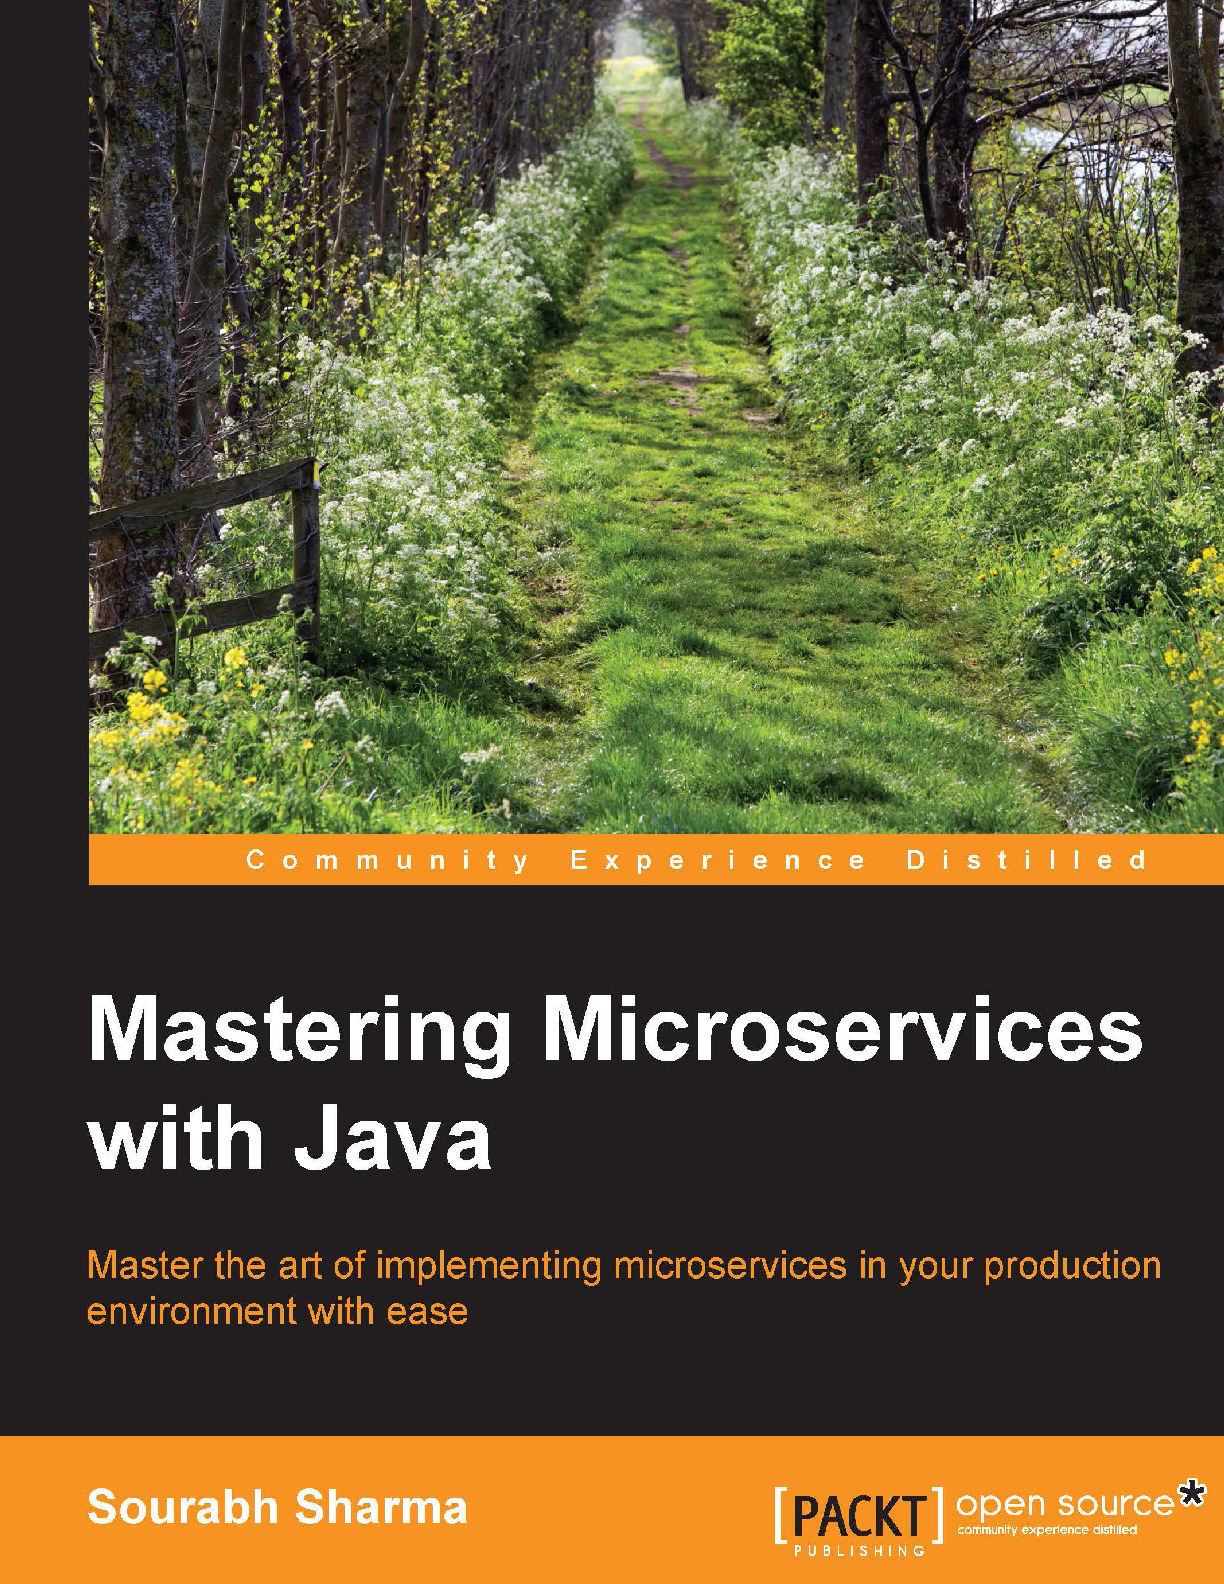 3.Mastering-Microservices-with-Java